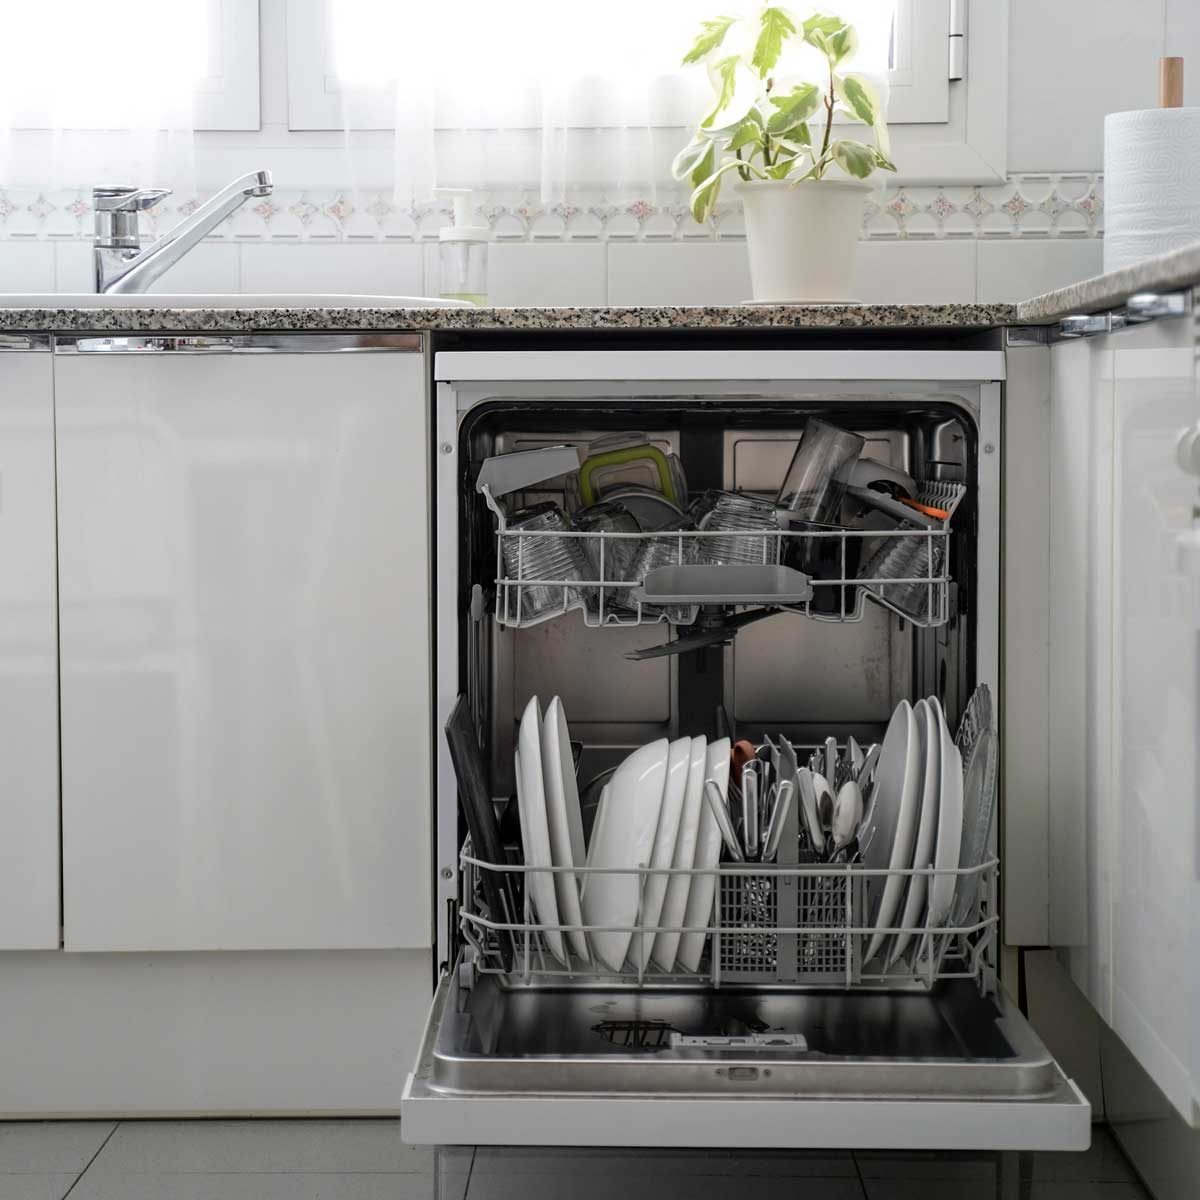 Dishwasher Gettyimages 1220405482